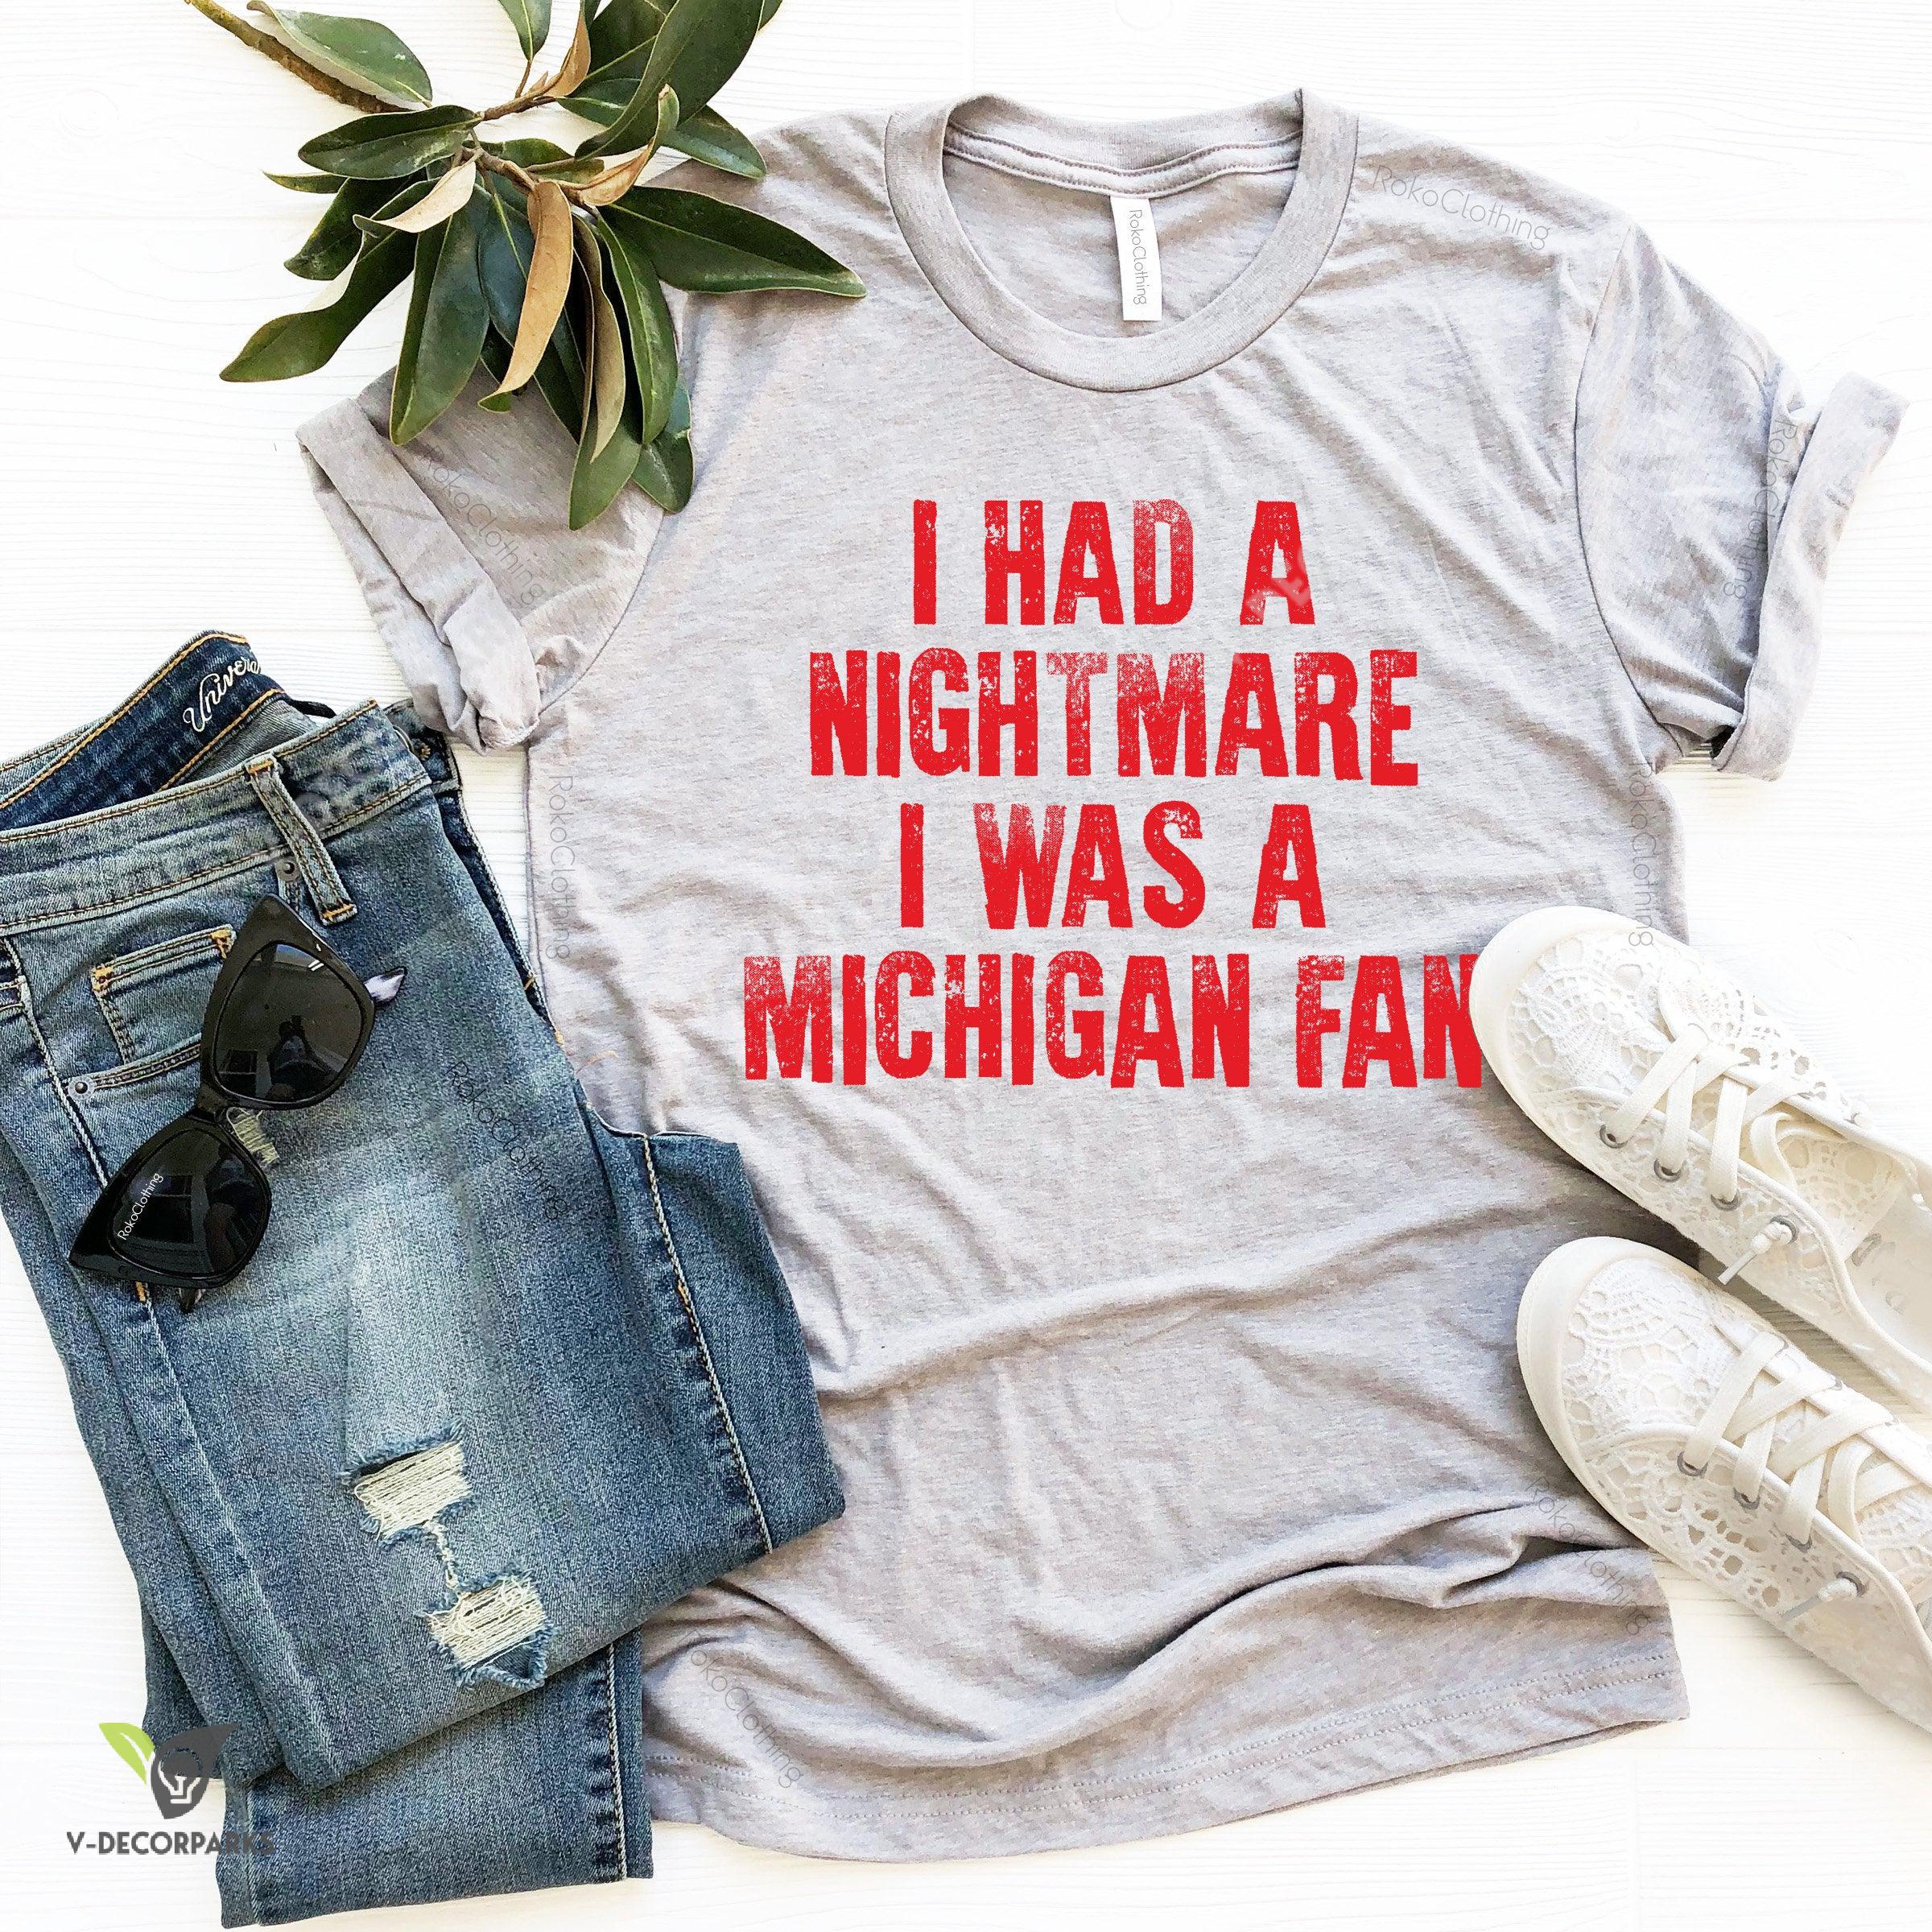 Nightmare I Was A Michigan Fan T-shirt, Funny Ohio State Buckeyes Football Tee Red Ink